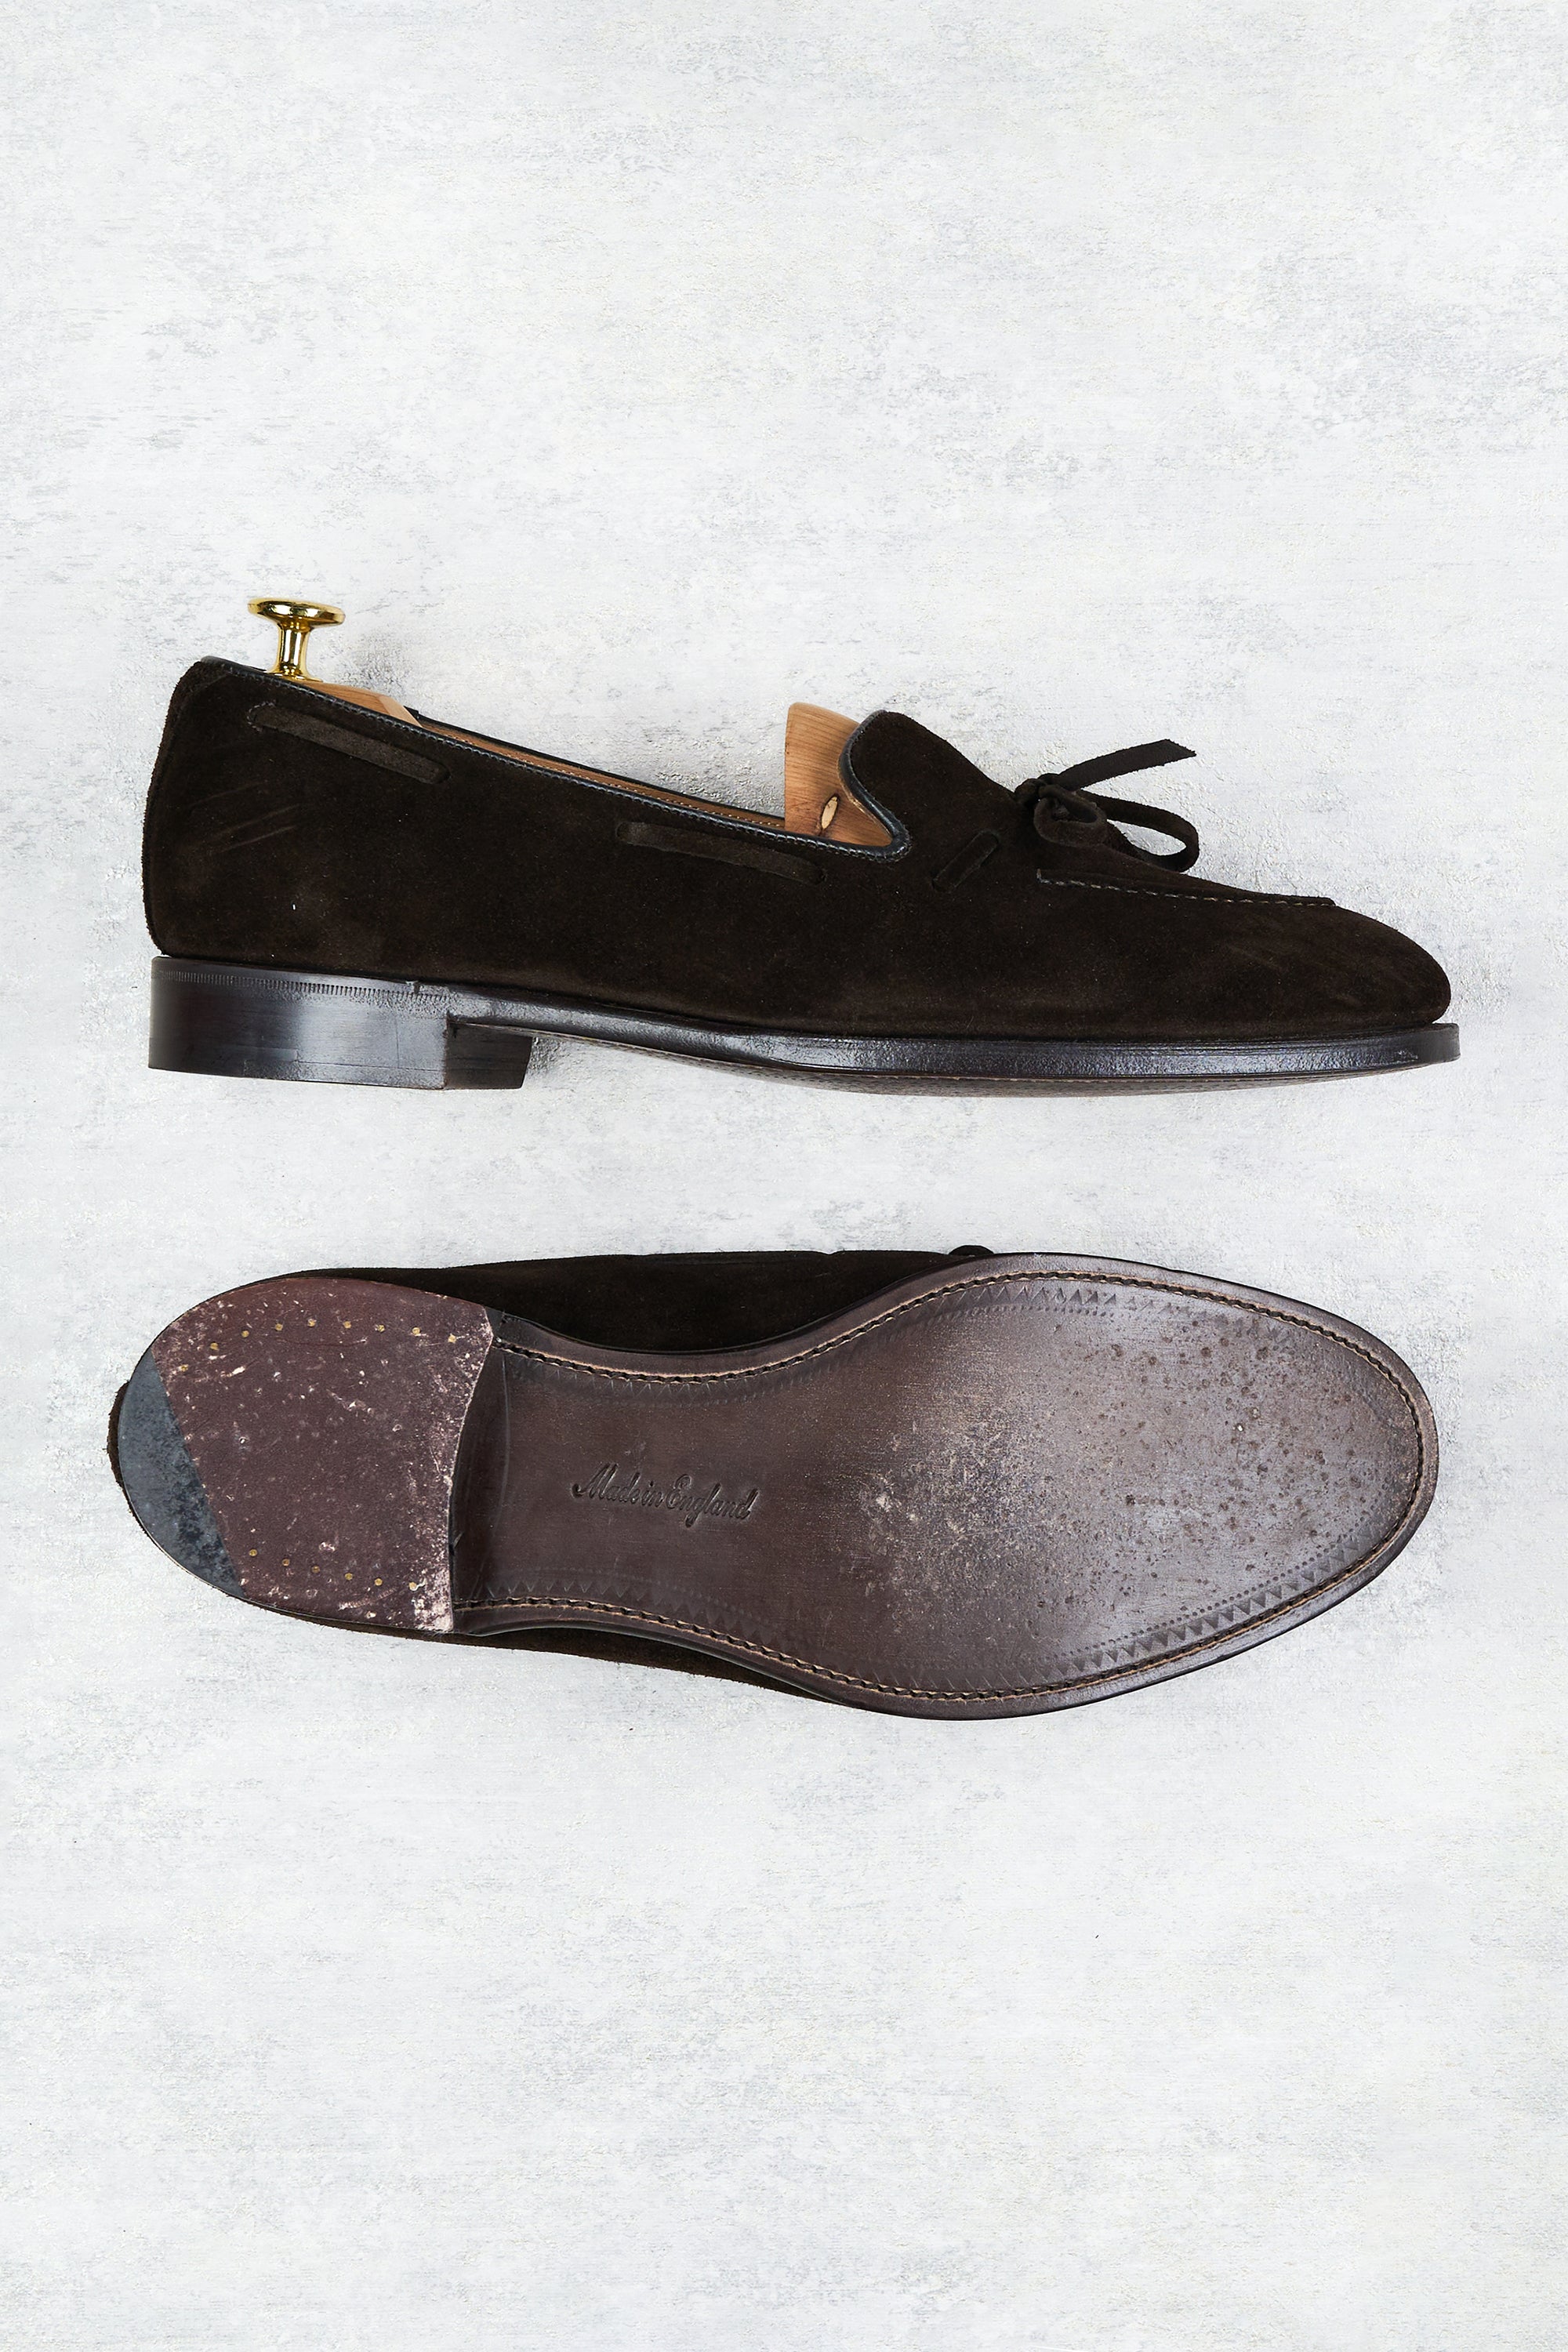 The Armoury Bitter Chocolate Janus Suede Greenwich String Loafers *sample*